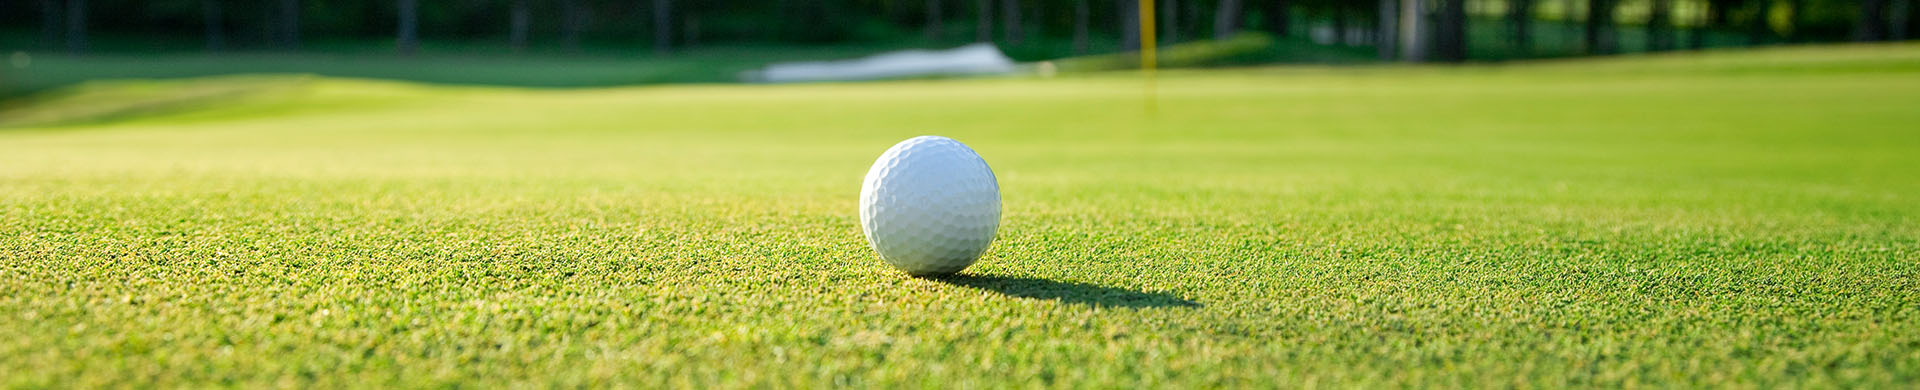 Close up on a golf ball on a putting green.